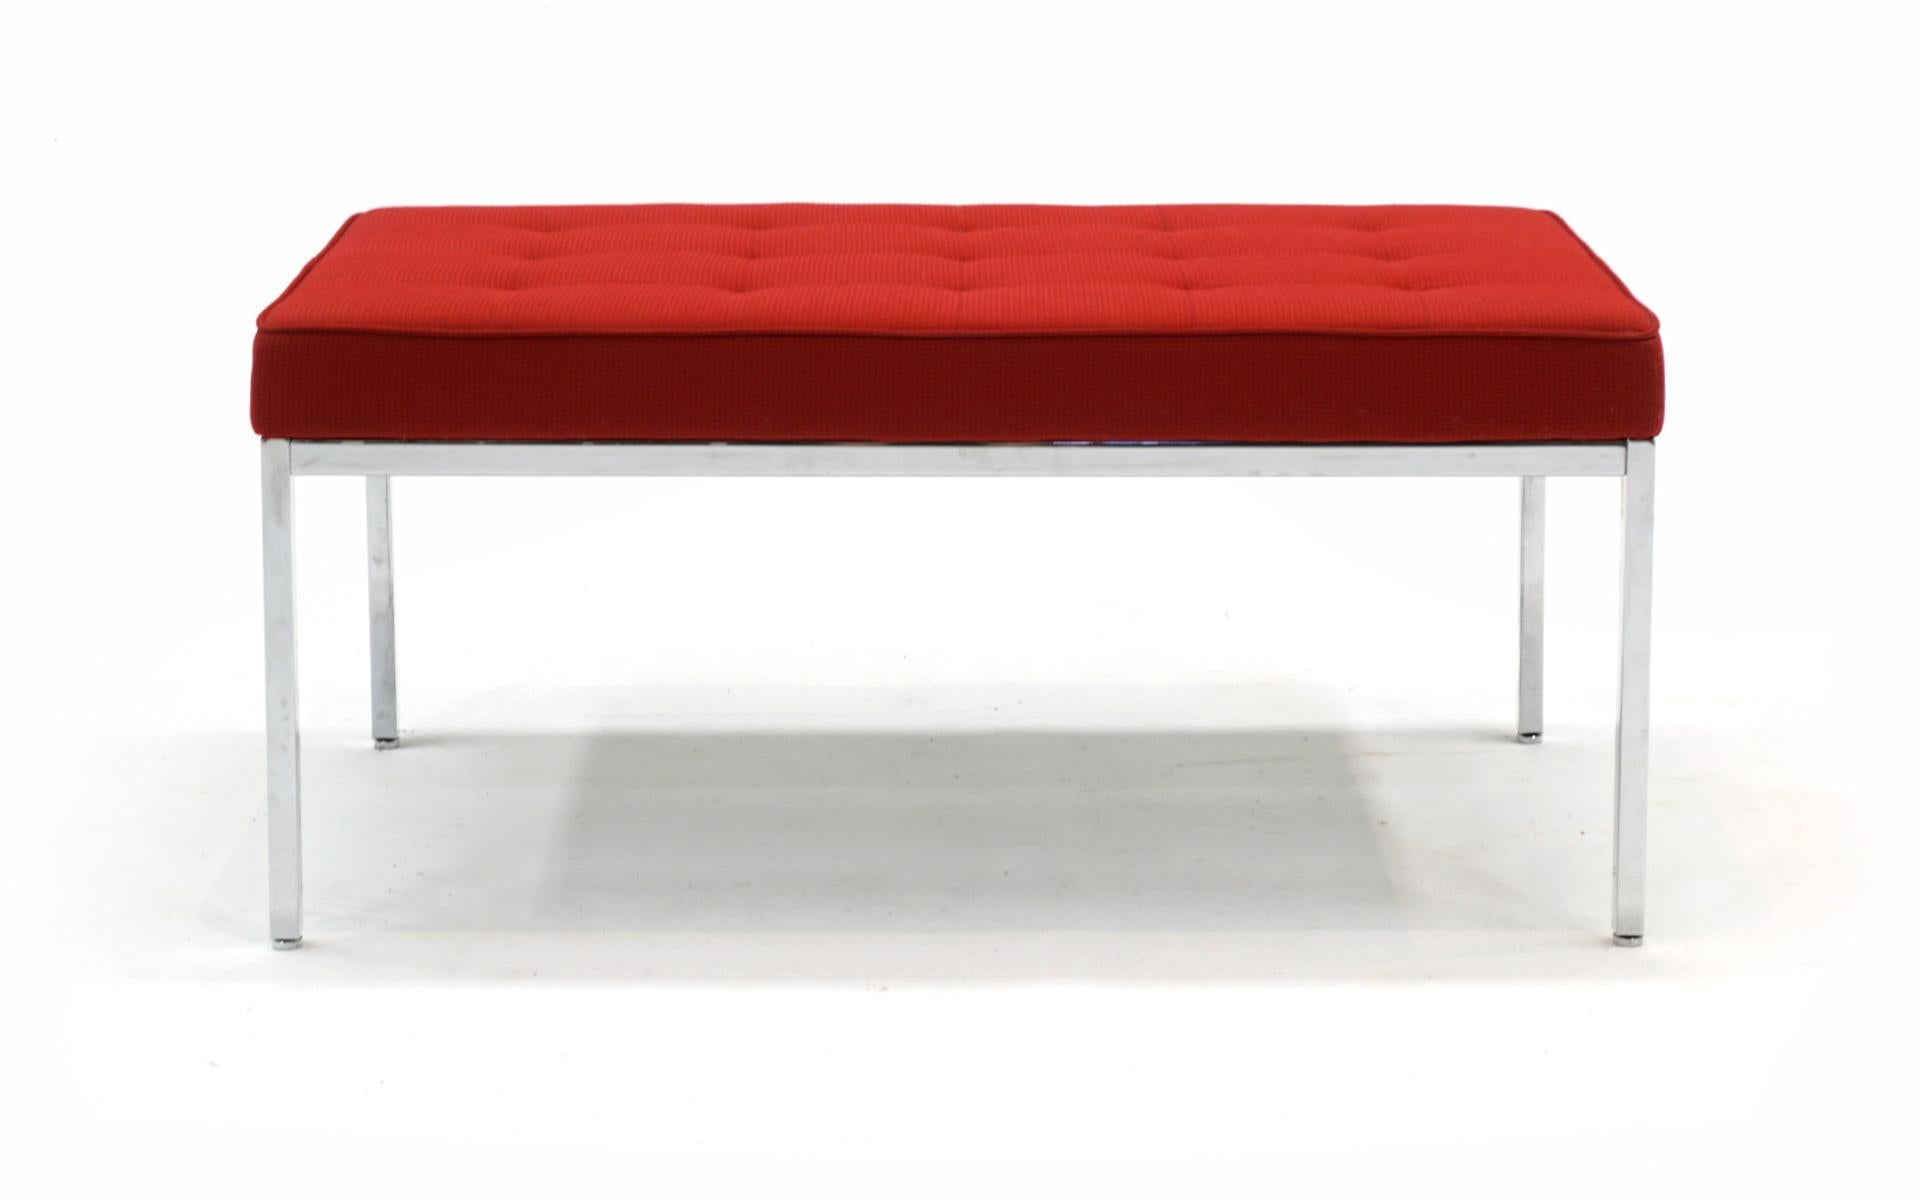 Two seat Florence Knoll Bench in red knoll fabric and heavy chromed steel frame. Produced in 2009, this bench has seen very little use. Very good condition with no stains or tears to the fabric. All feet are intact and the chrome finish is bright